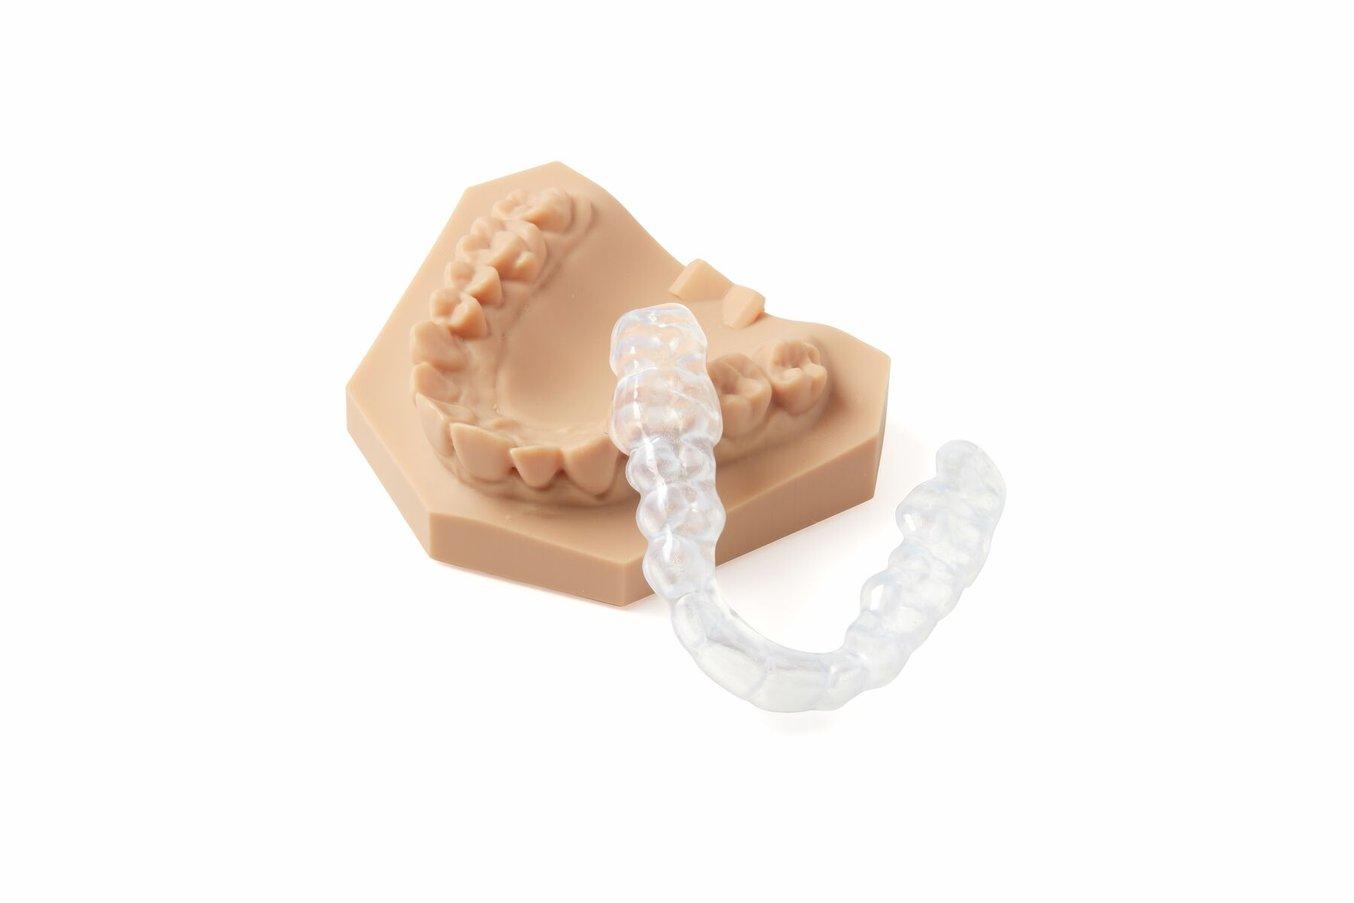 3D printed model and clear, 3D printed occlusal splint